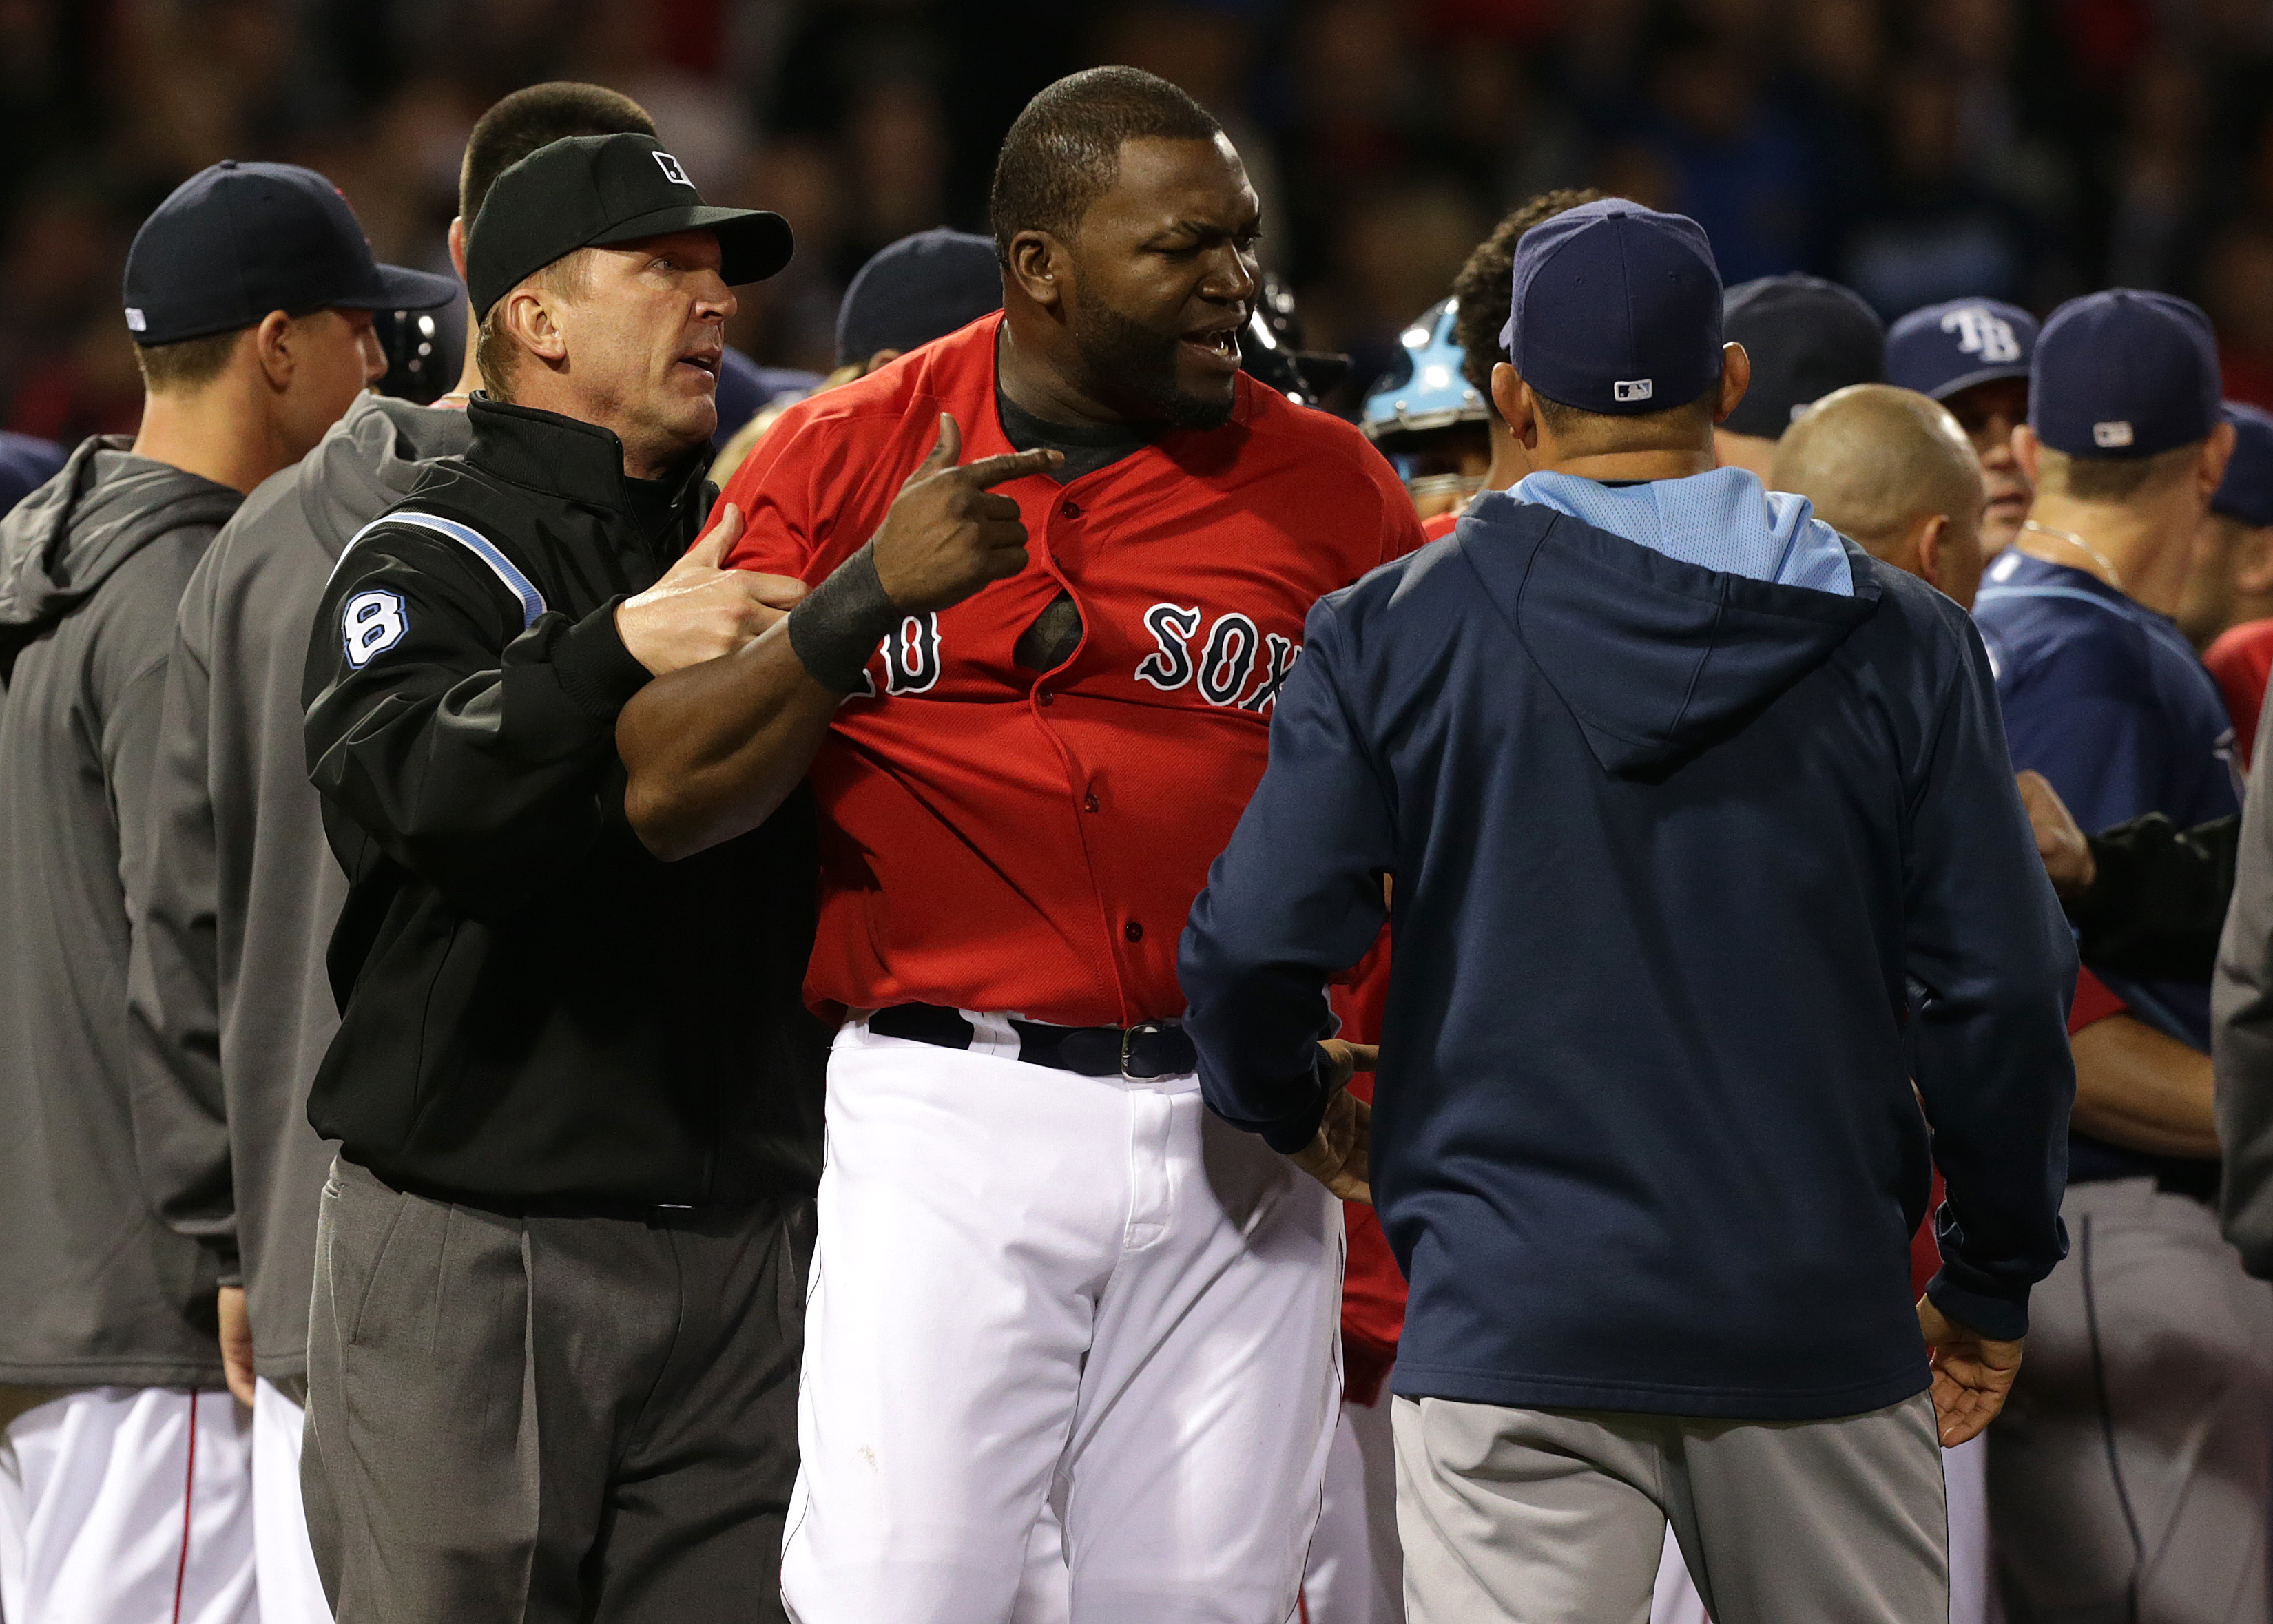 Ortiz was about to get into it with the Rays before umpire Jeff Kellogg restrained him during a May 30 game at Fenway.